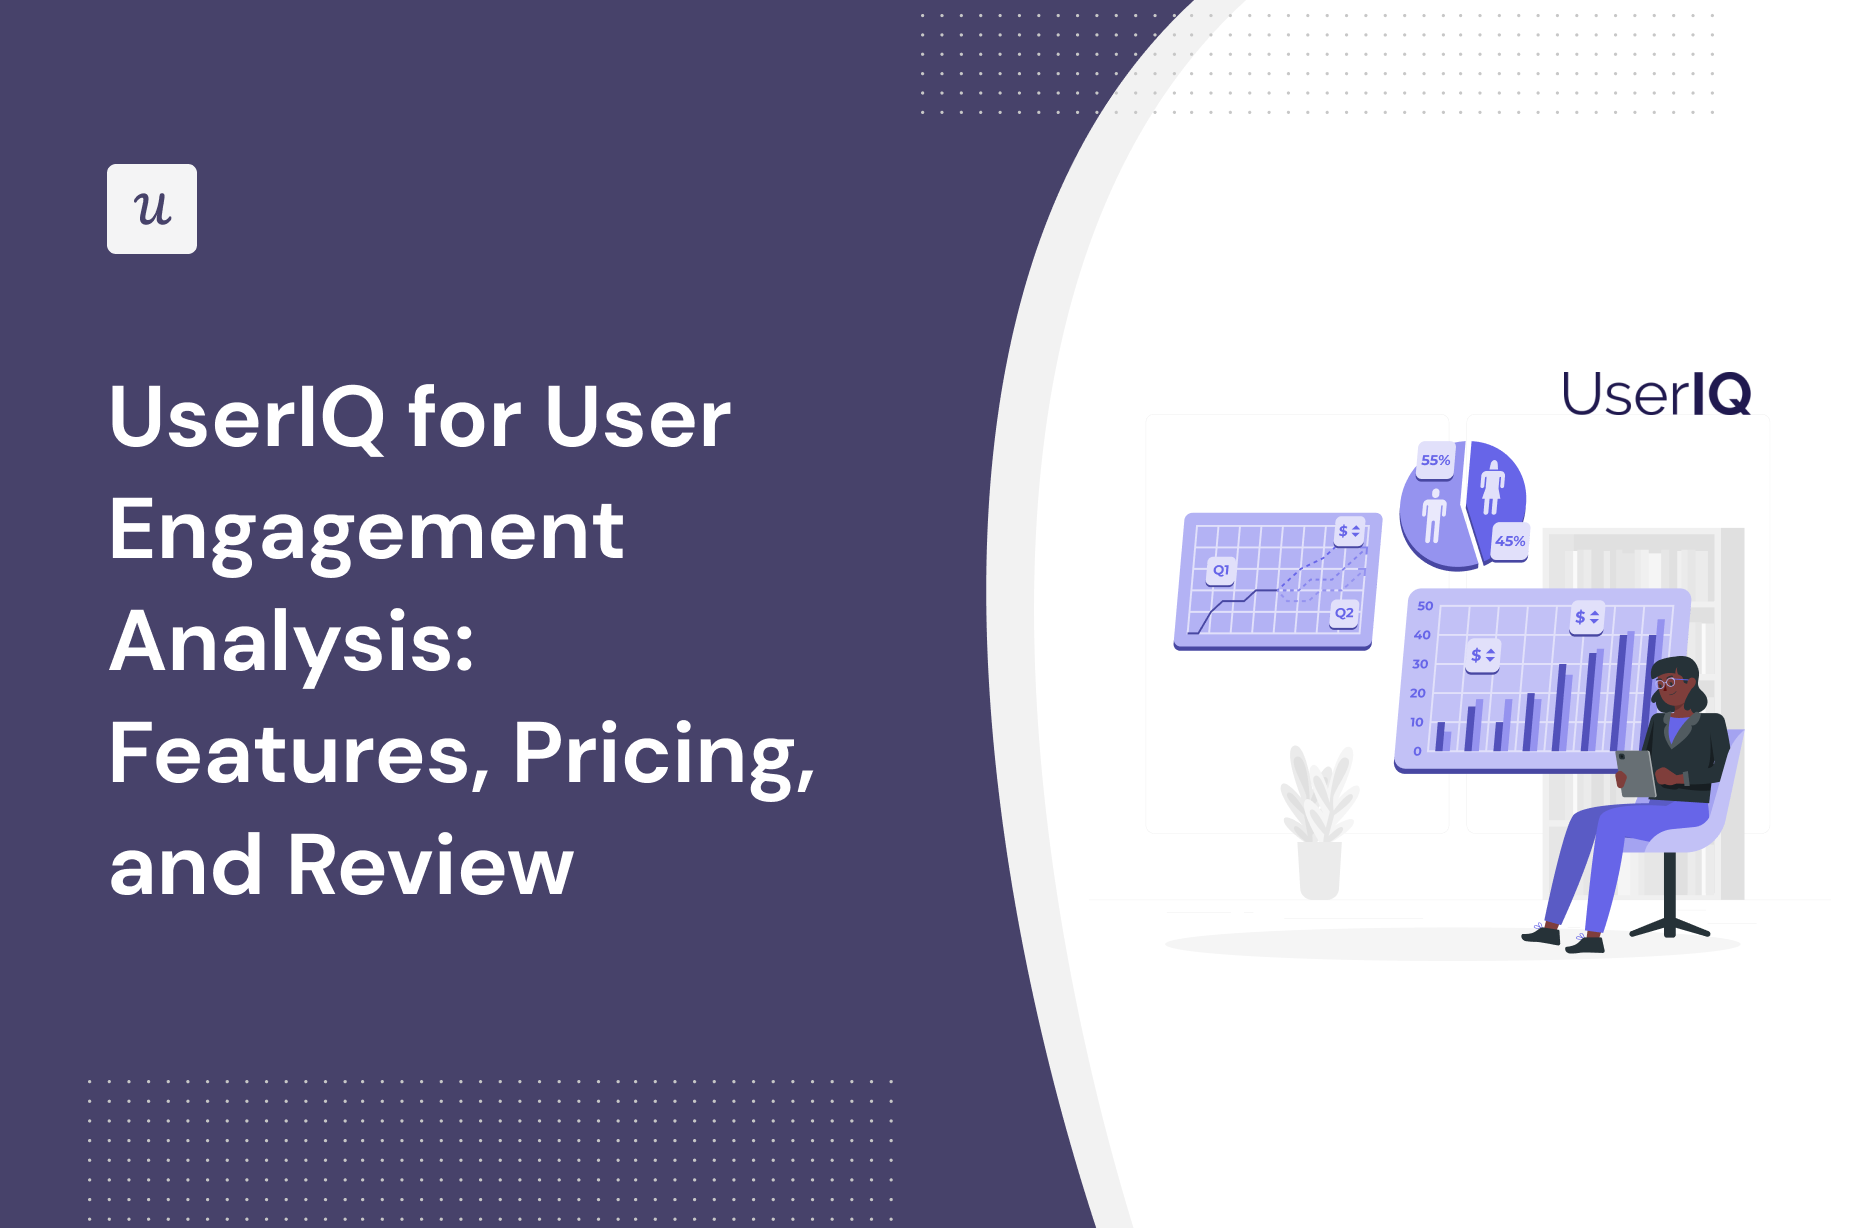 UserIQ for User Engagement Analysis: Features, Pricing, and Review